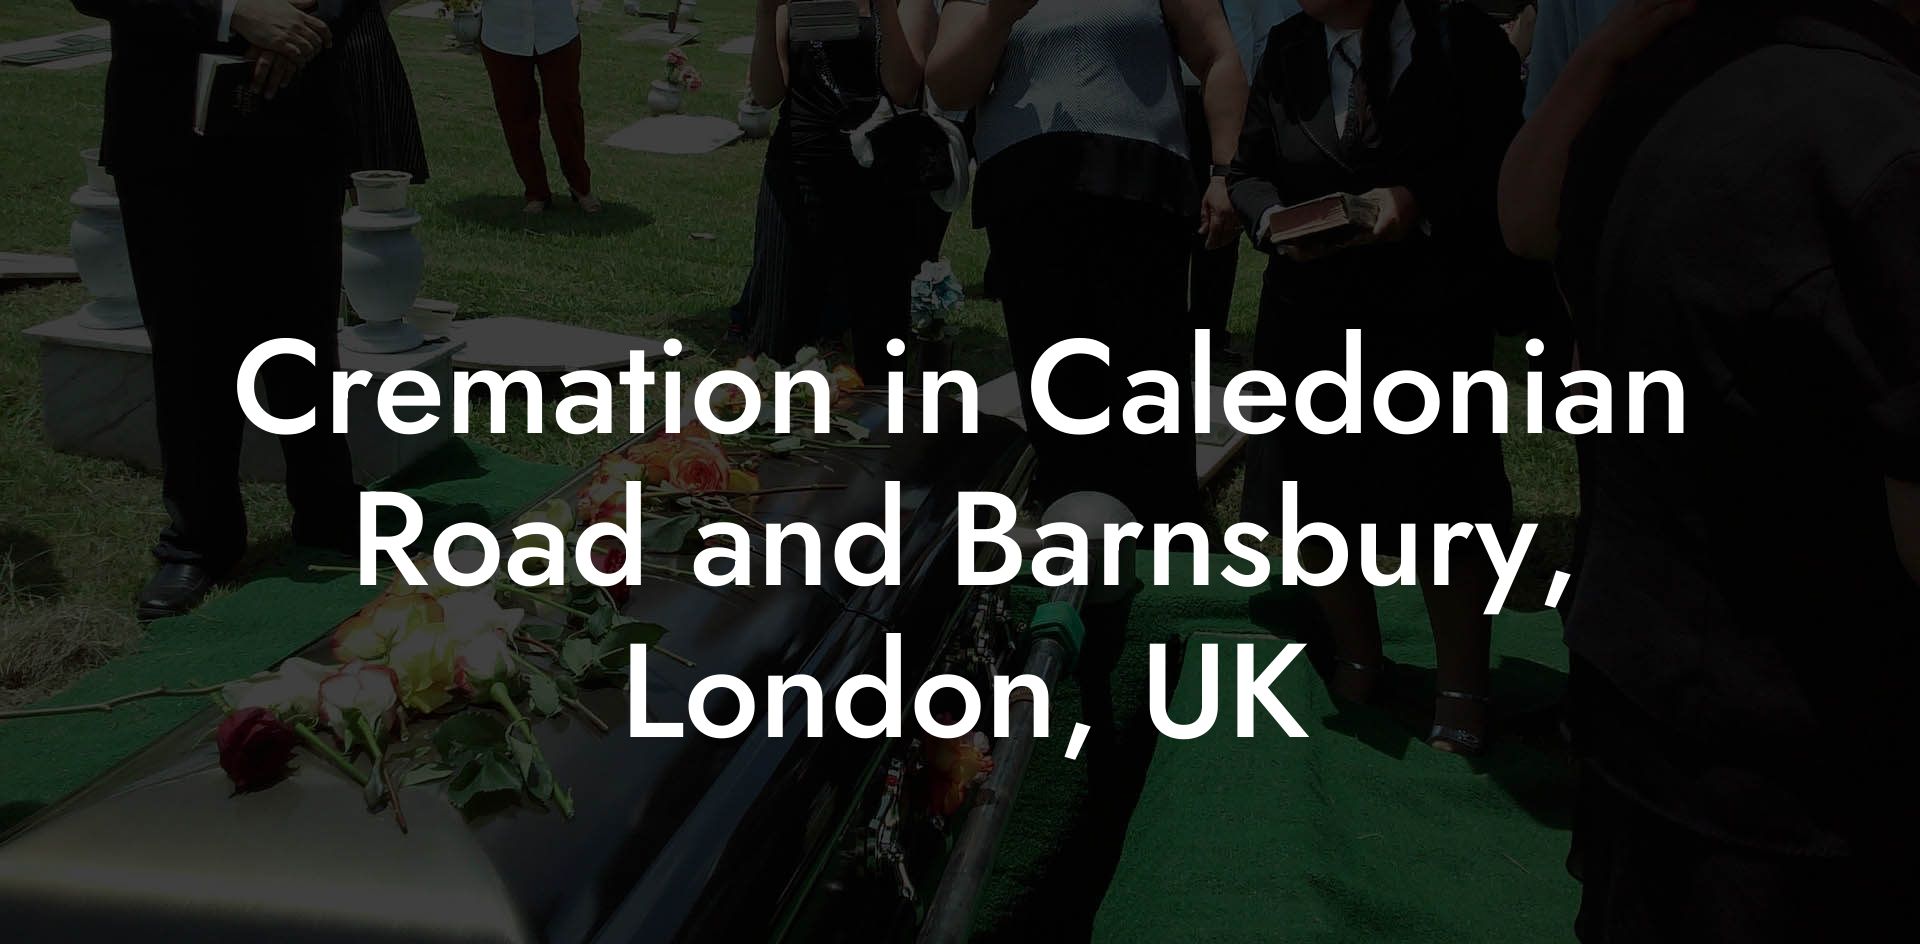 Cremation in Caledonian Road and Barnsbury, London, UK